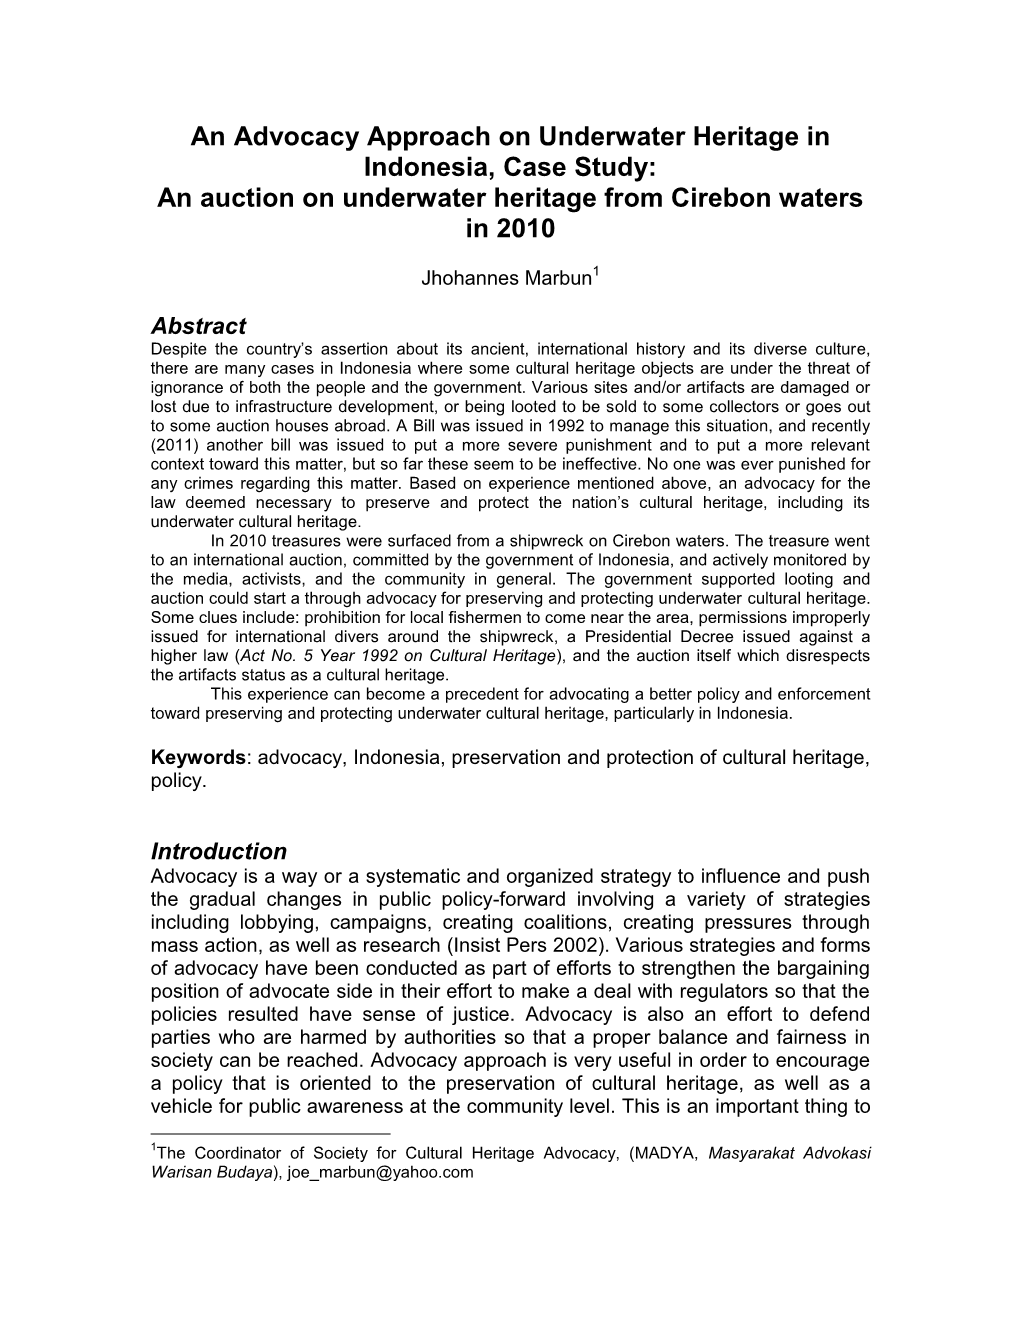 An Advocacy Approach on Underwater Heritage in Indonesia, Case Study: an Auction on Underwater Heritage from Cirebon Waters in 2010